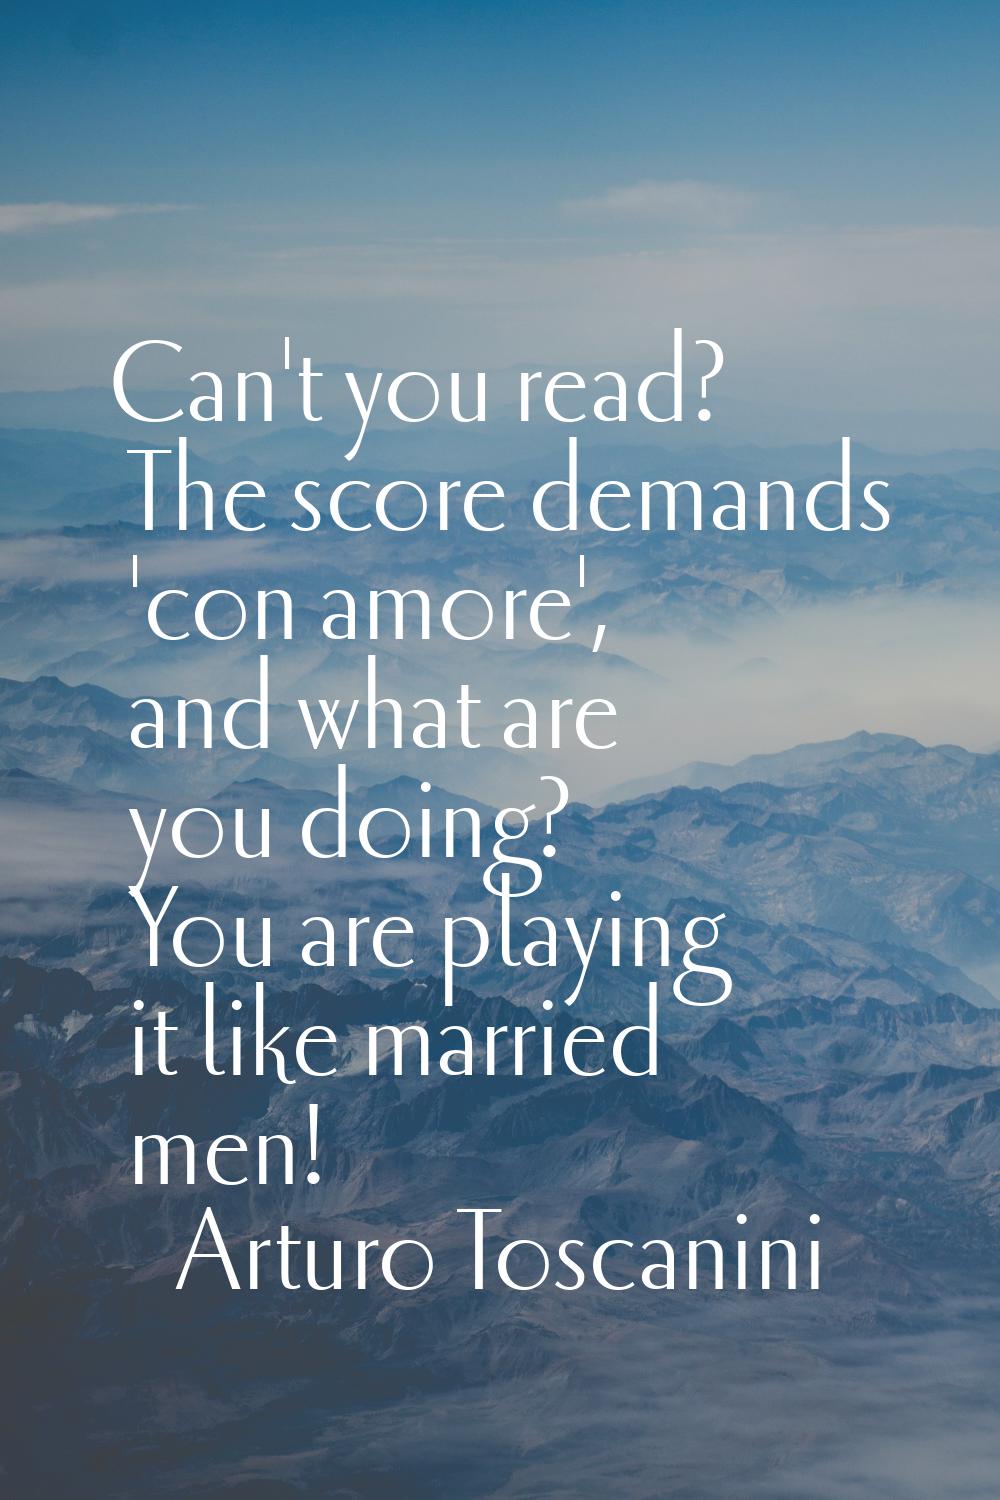 Can't you read? The score demands 'con amore', and what are you doing? You are playing it like marr